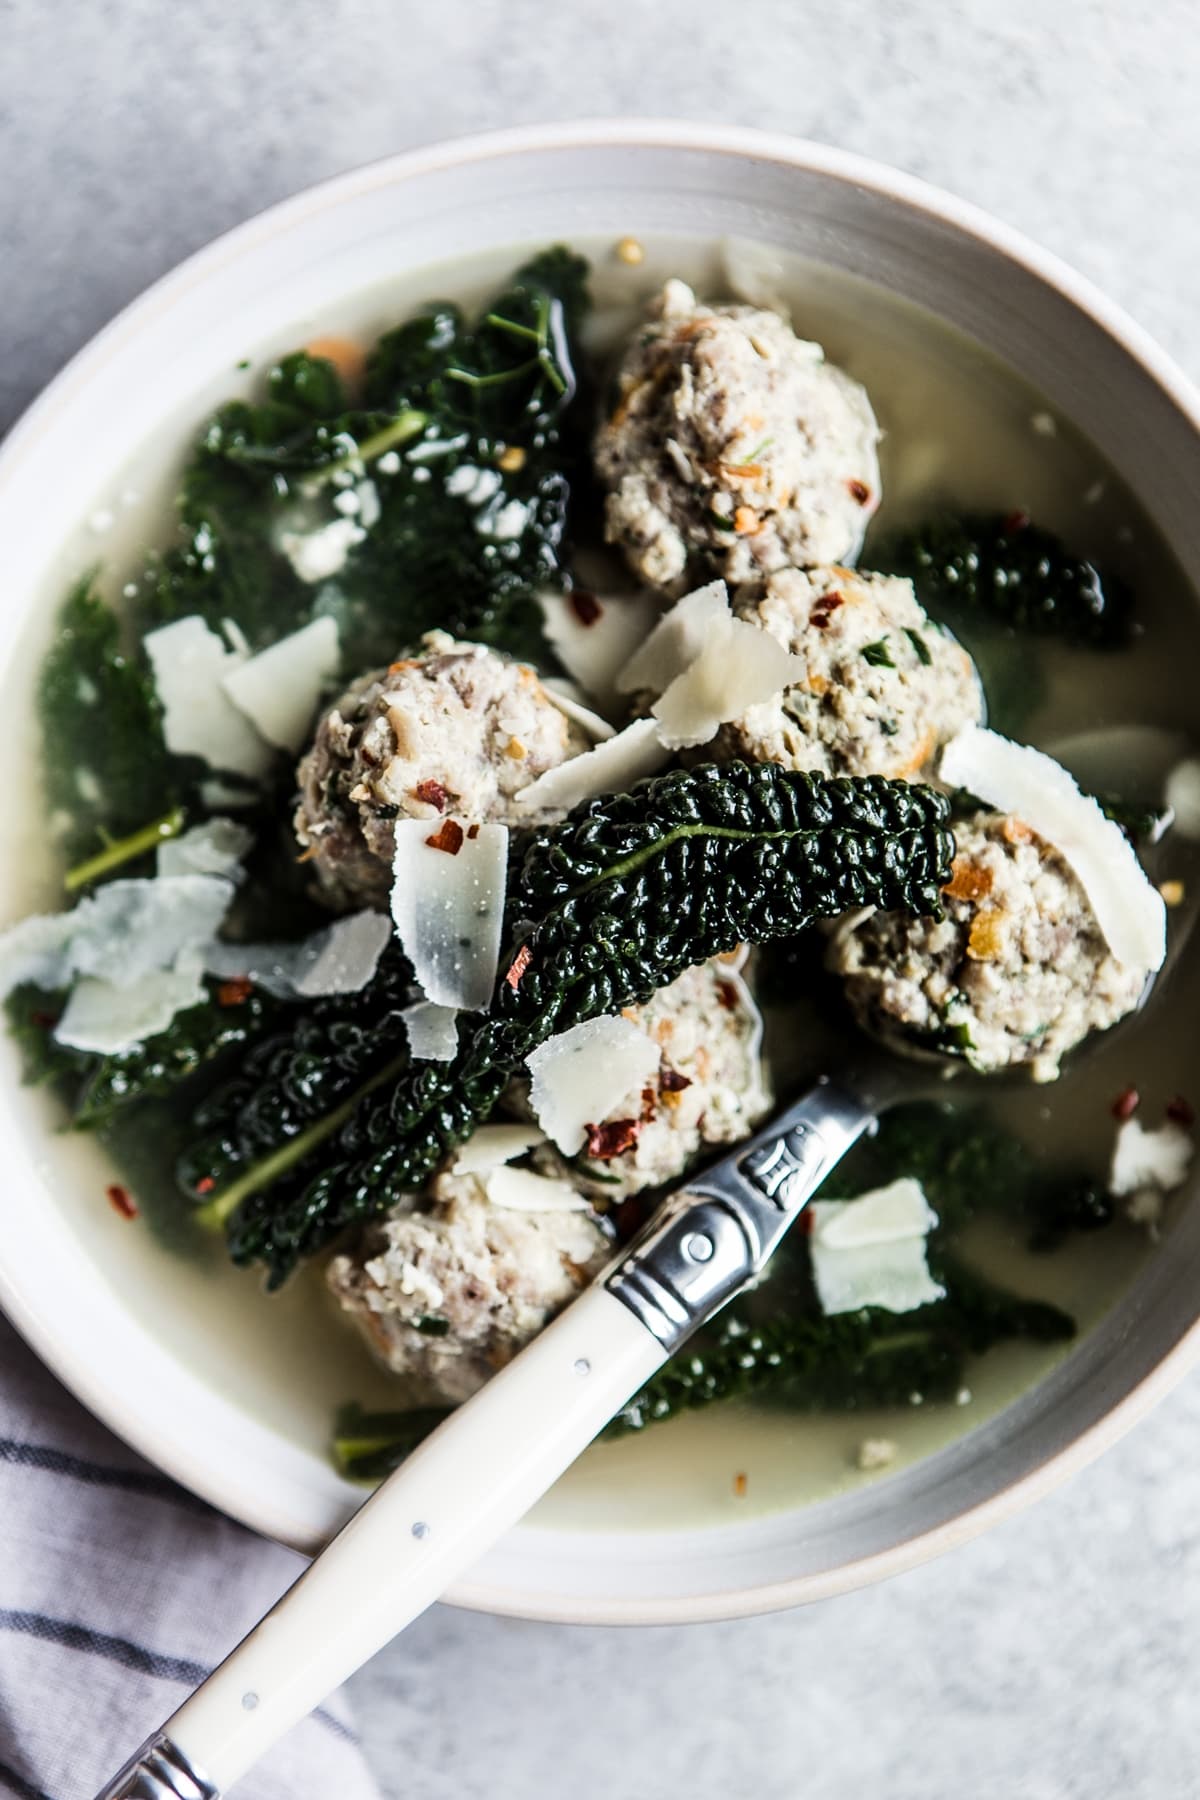 Paleo, whole30 Italian Wedding Soup with meatballs and kale in a bowl